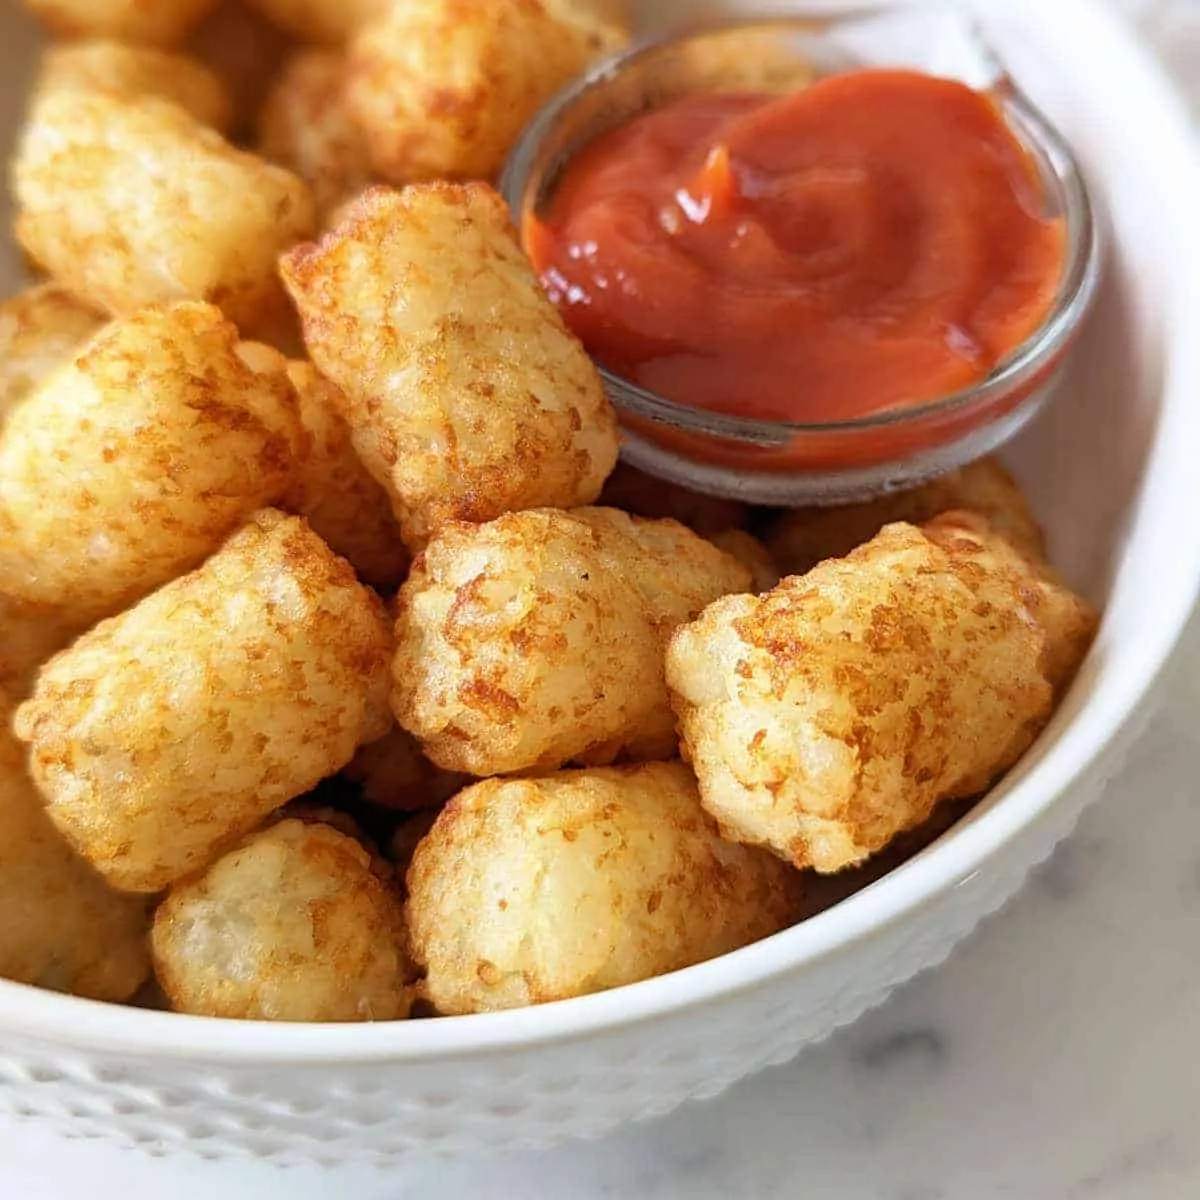 tater tots in bowl with ketchup.